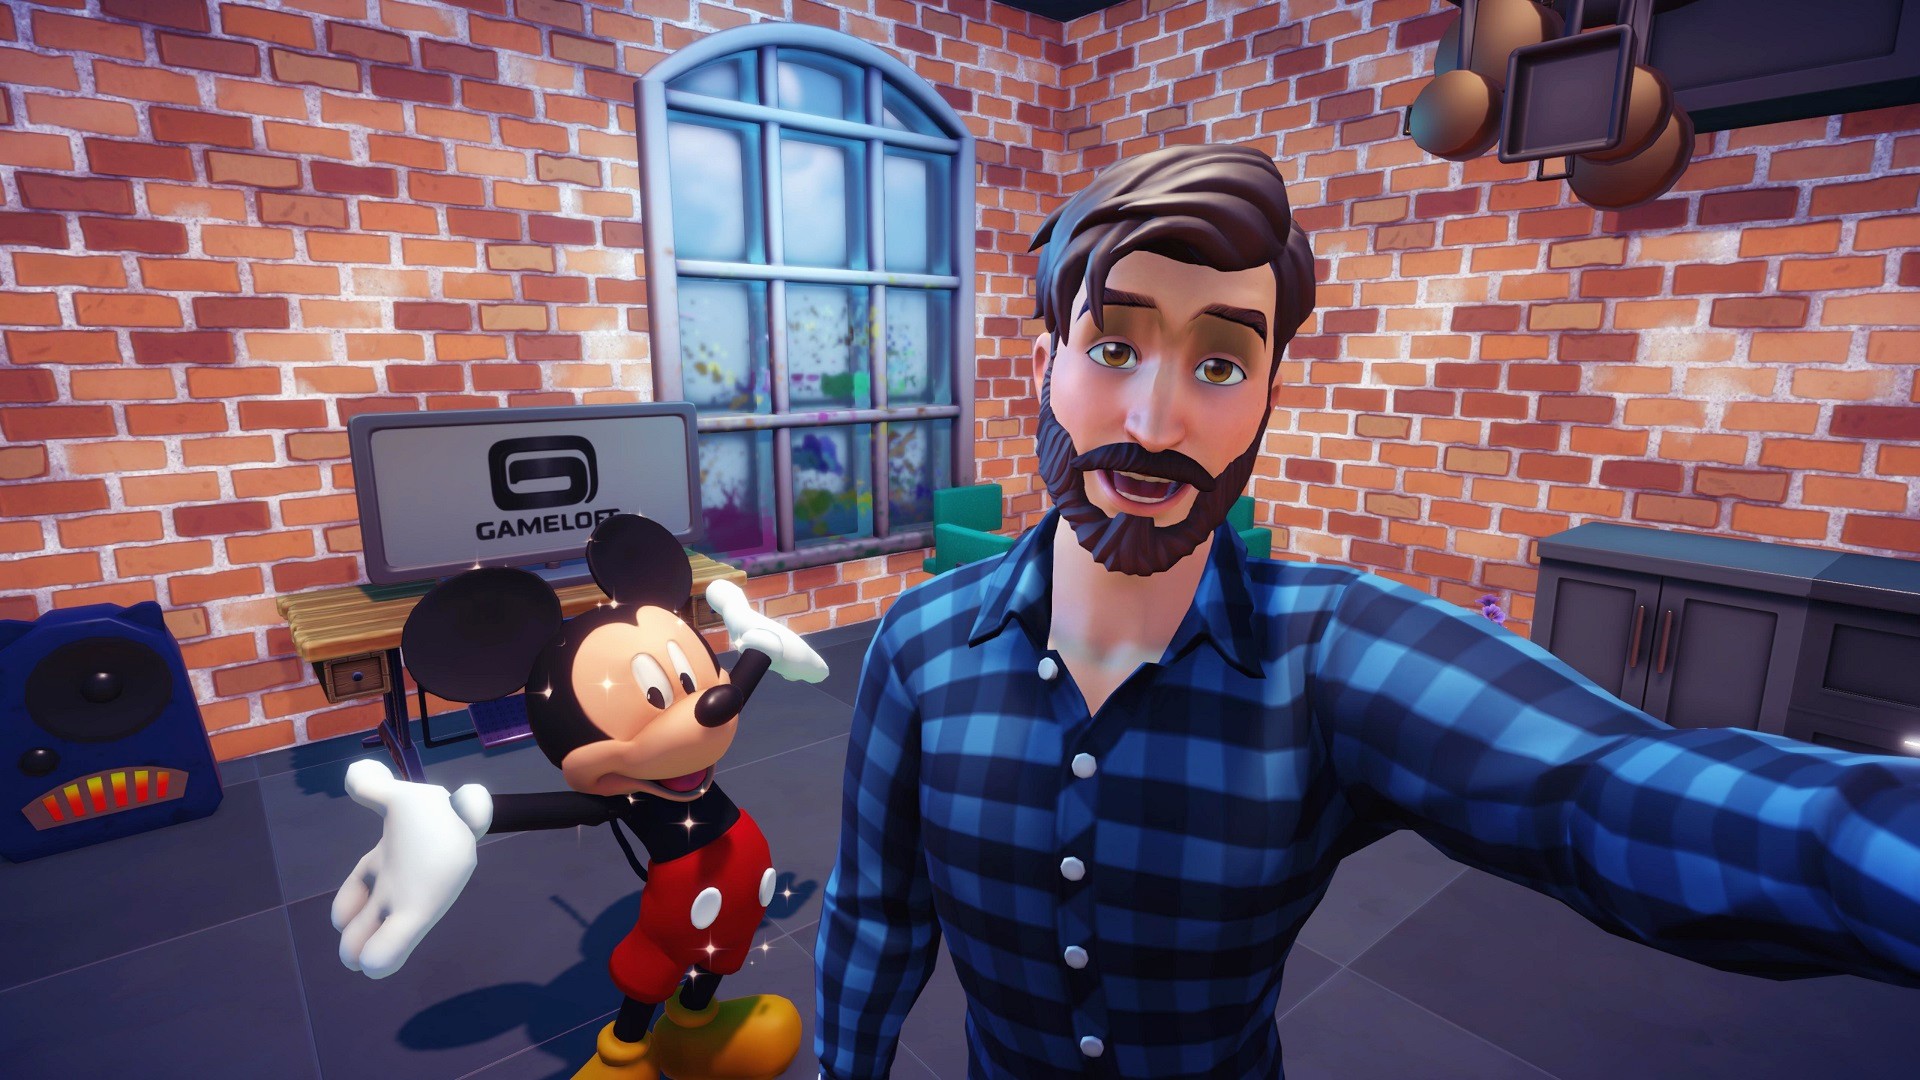 Disney Dreamlight Valley selfie competition could see players win big